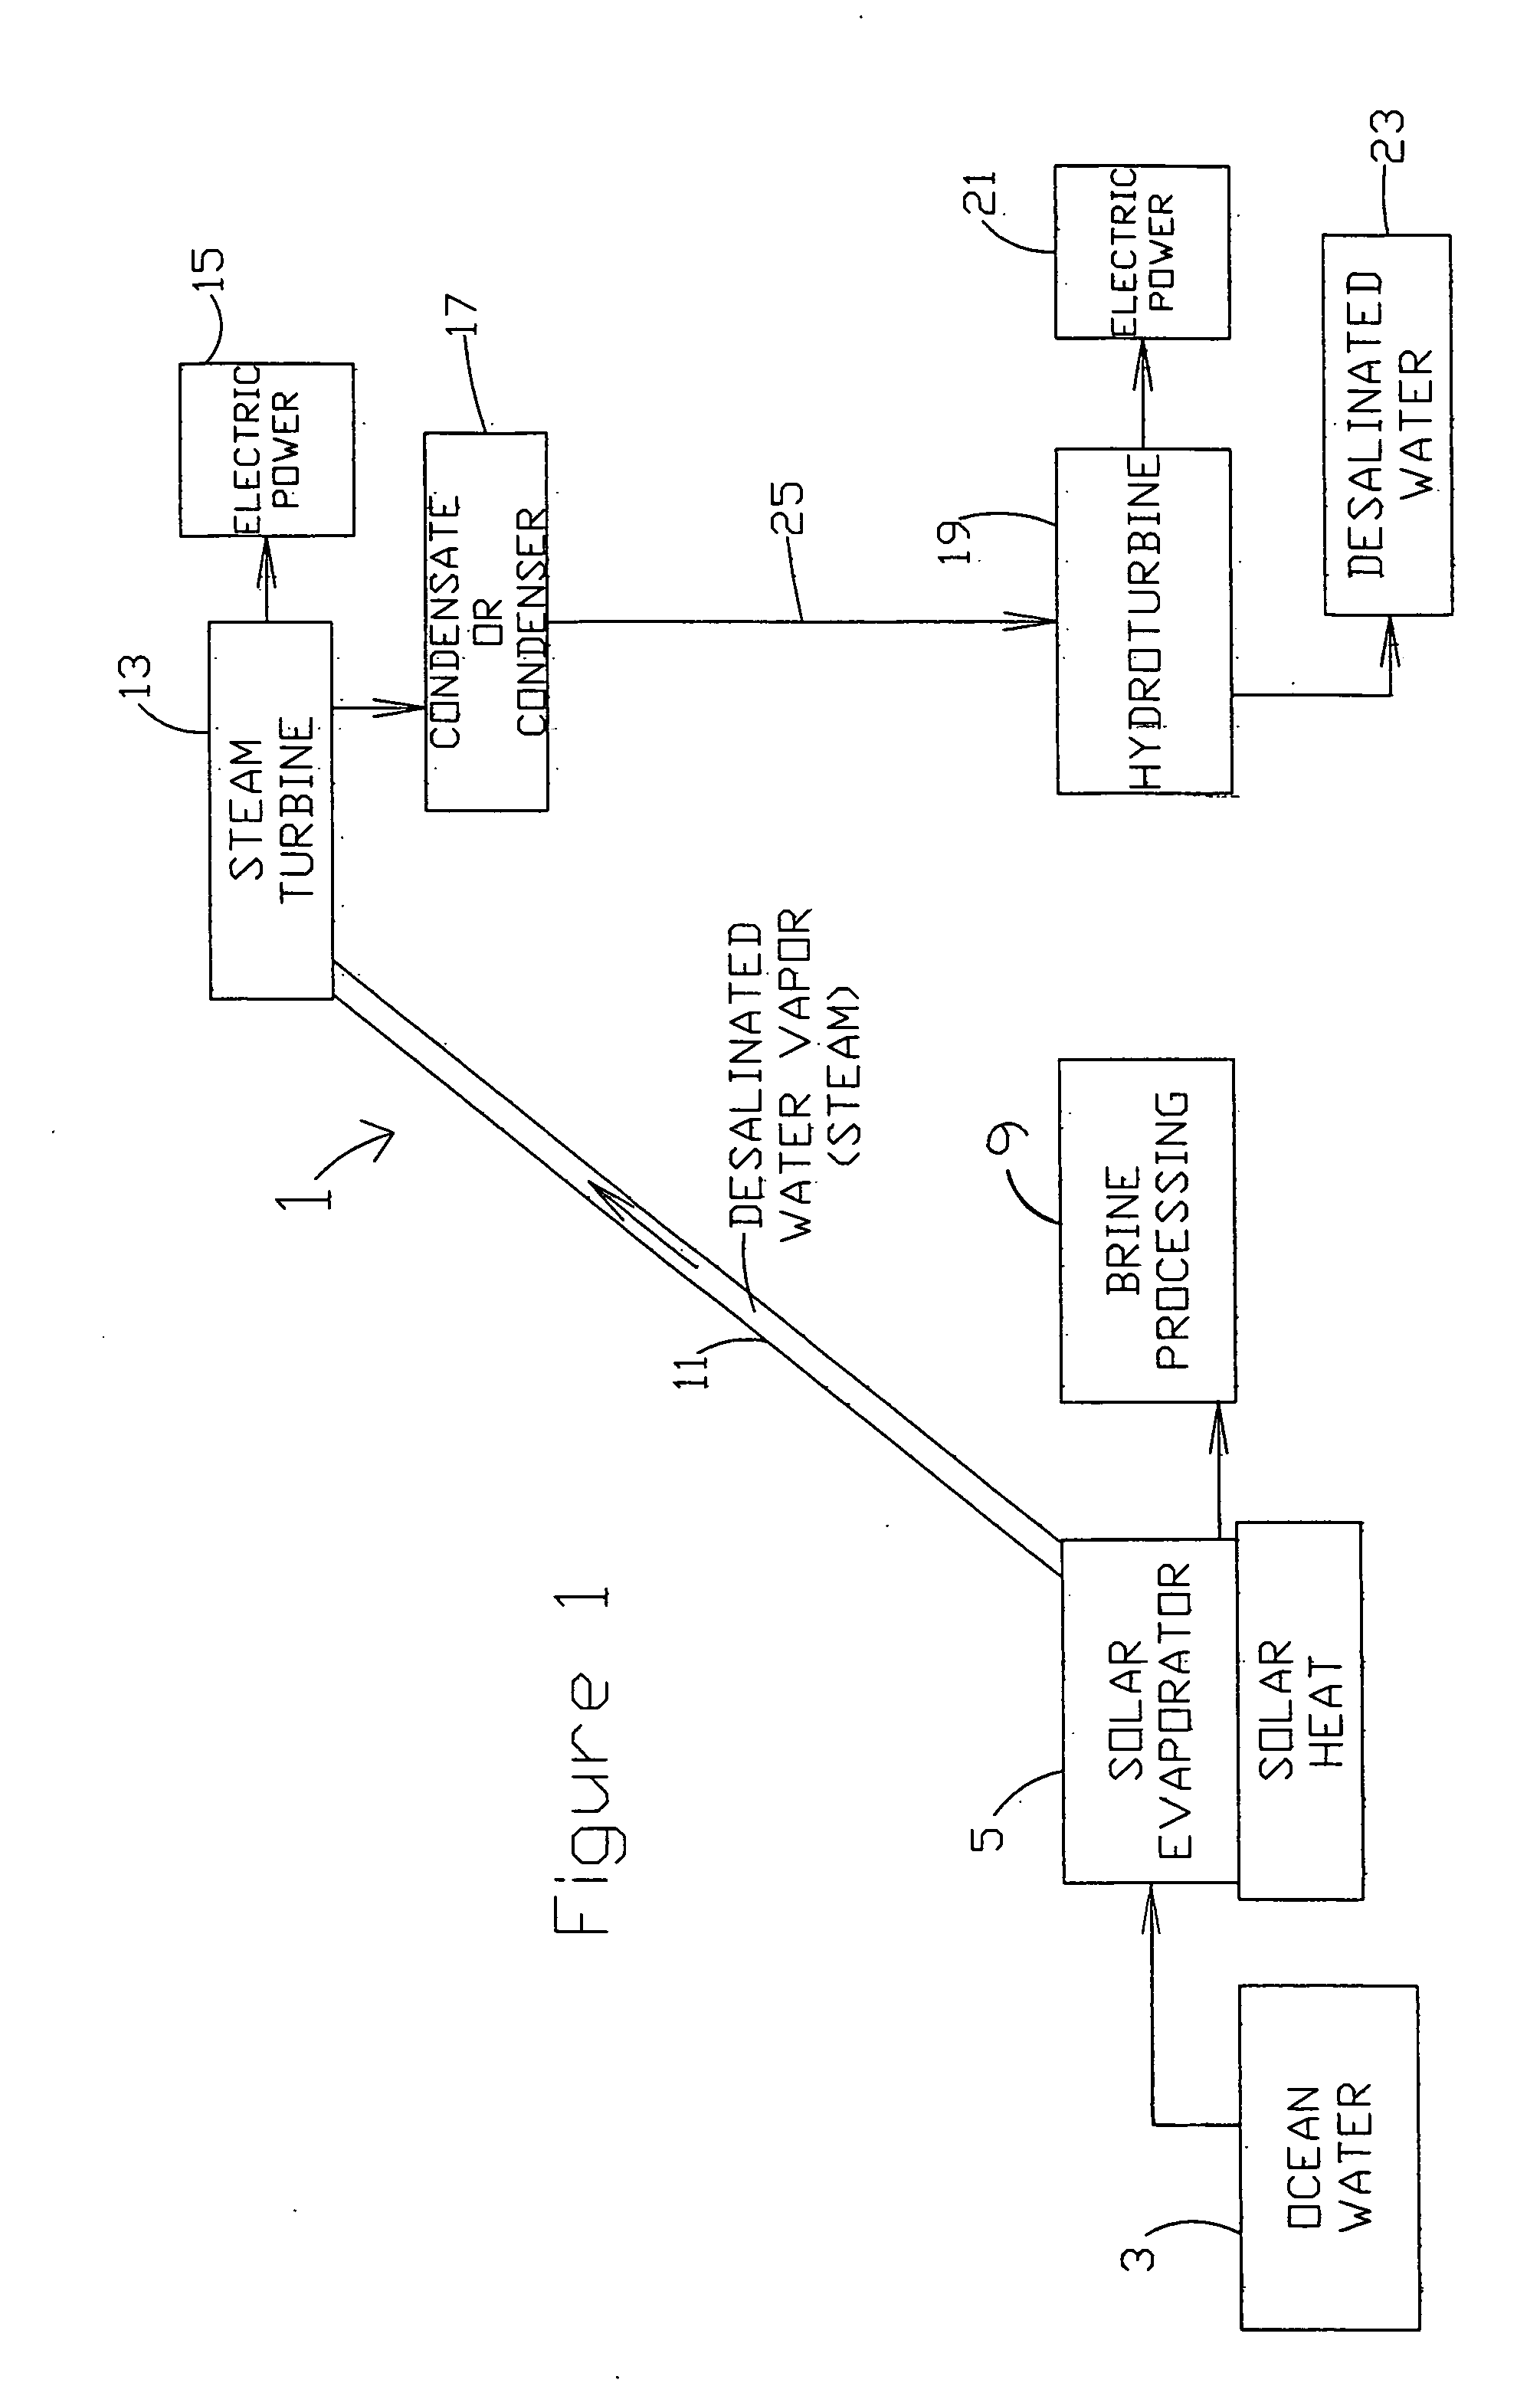 Solar desalination system with reciprocating solar engine pumps